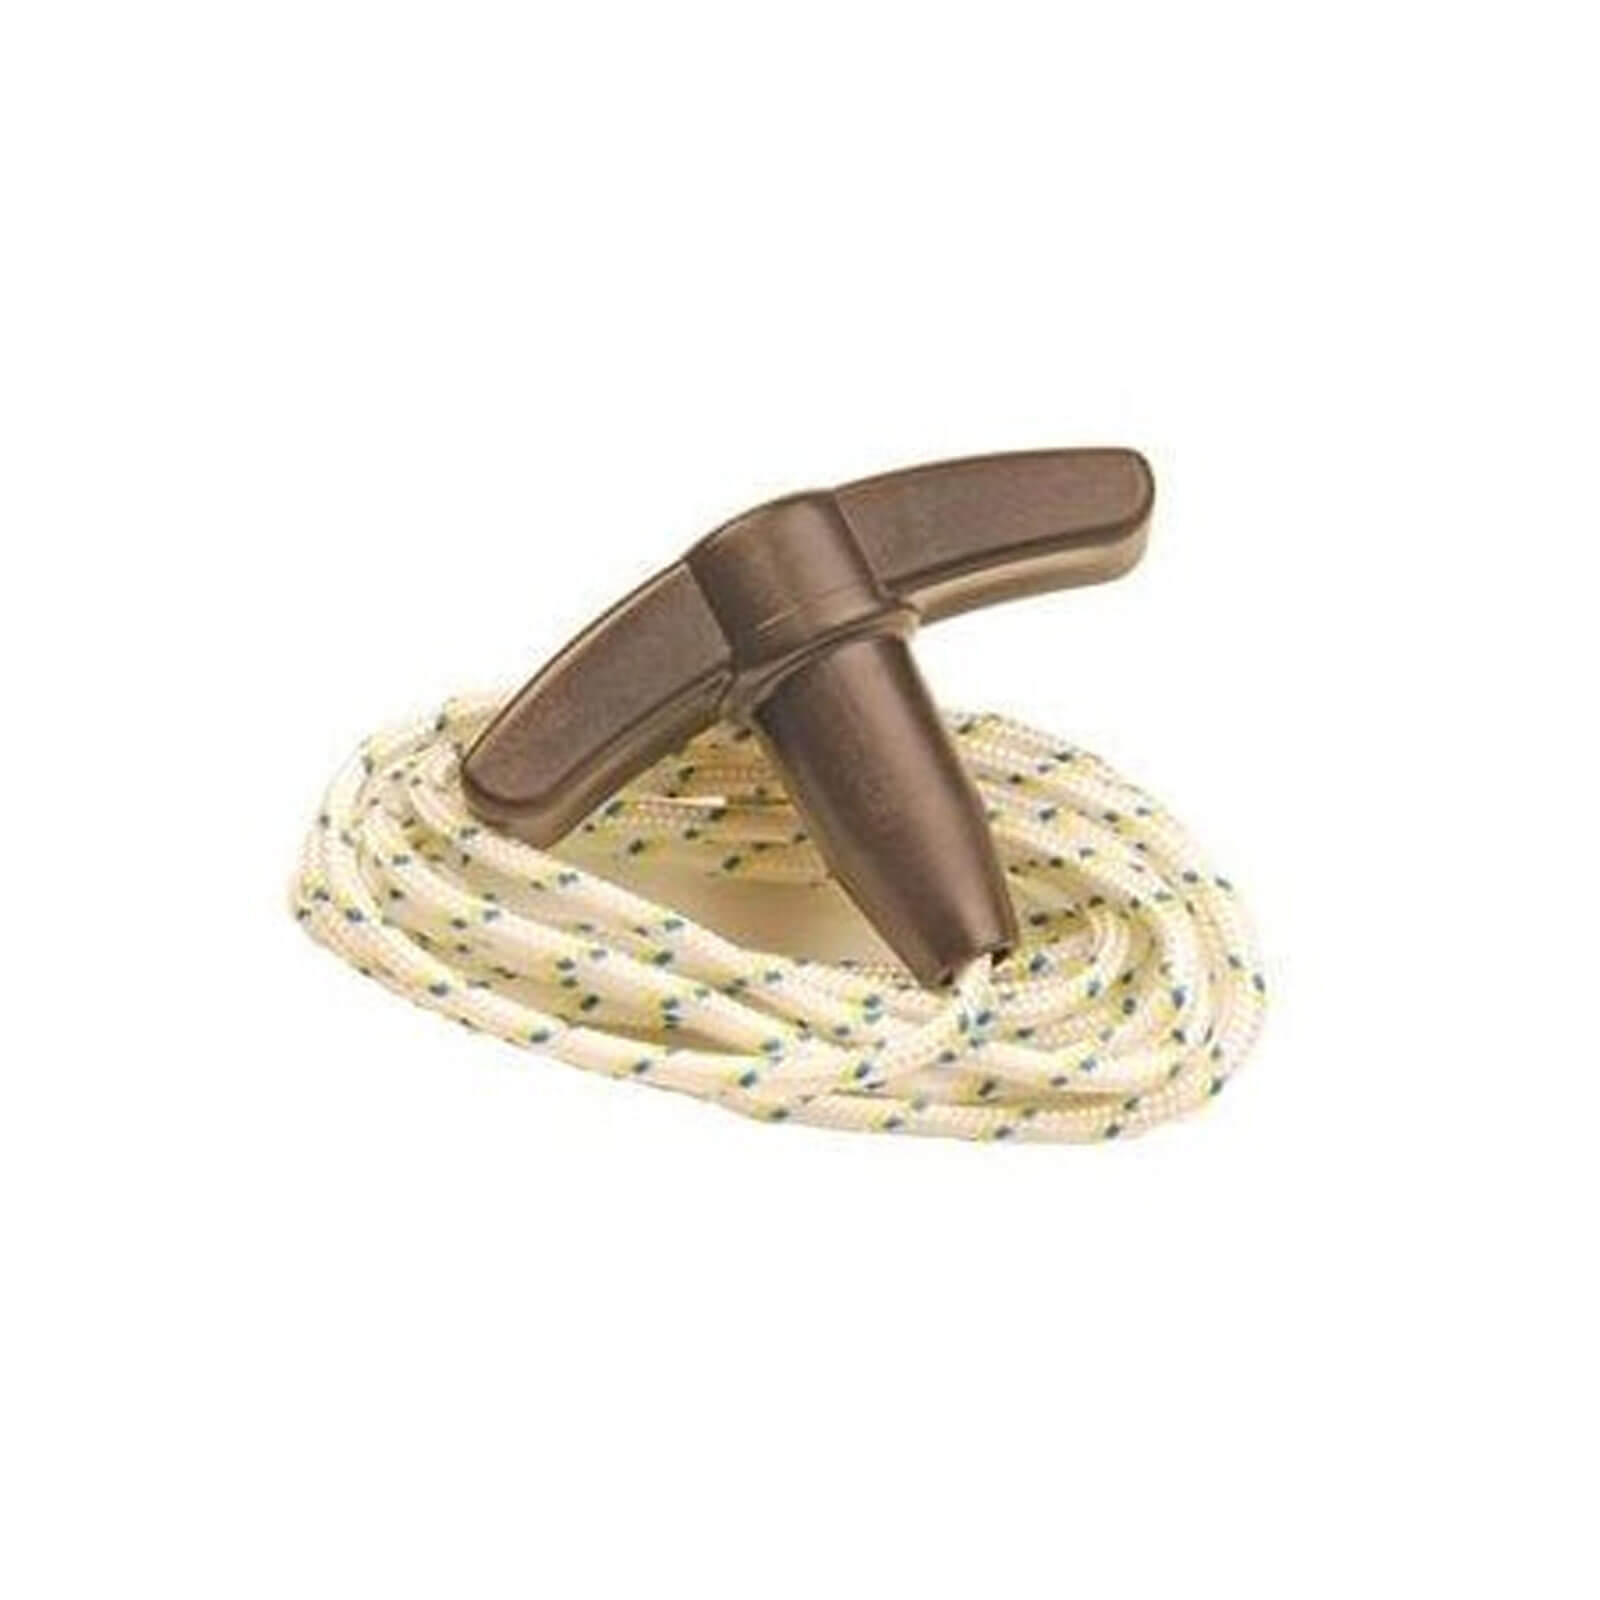 Photo of Handy Recoil Rope And Handle